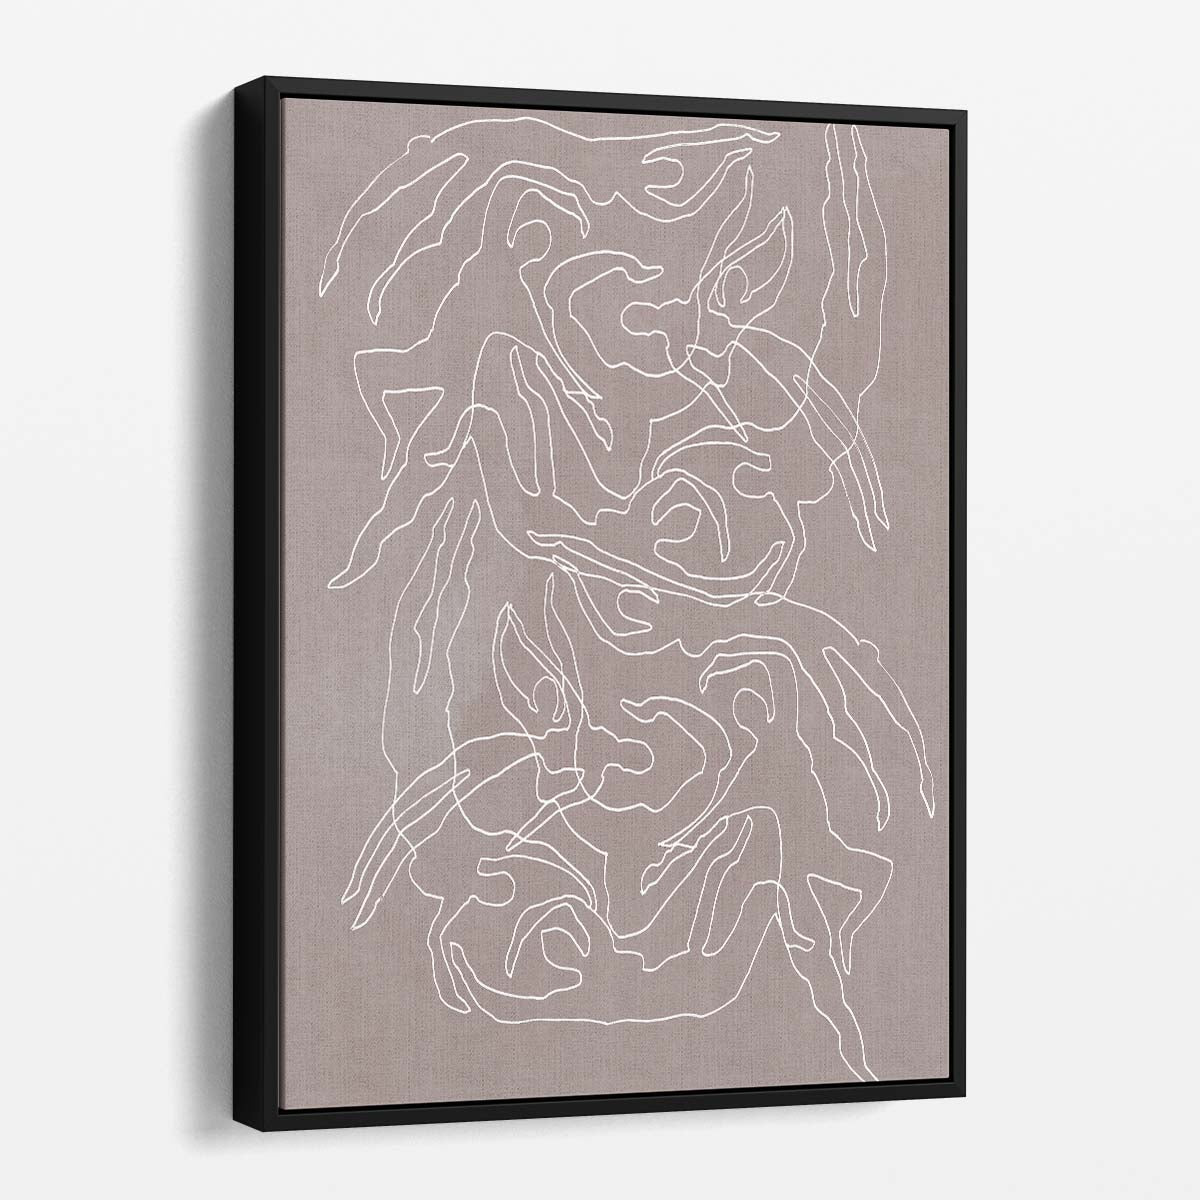 Abstract Line Art Swimmers Illustration in Beige, BodyScape Drawing by Luxuriance Designs, made in USA